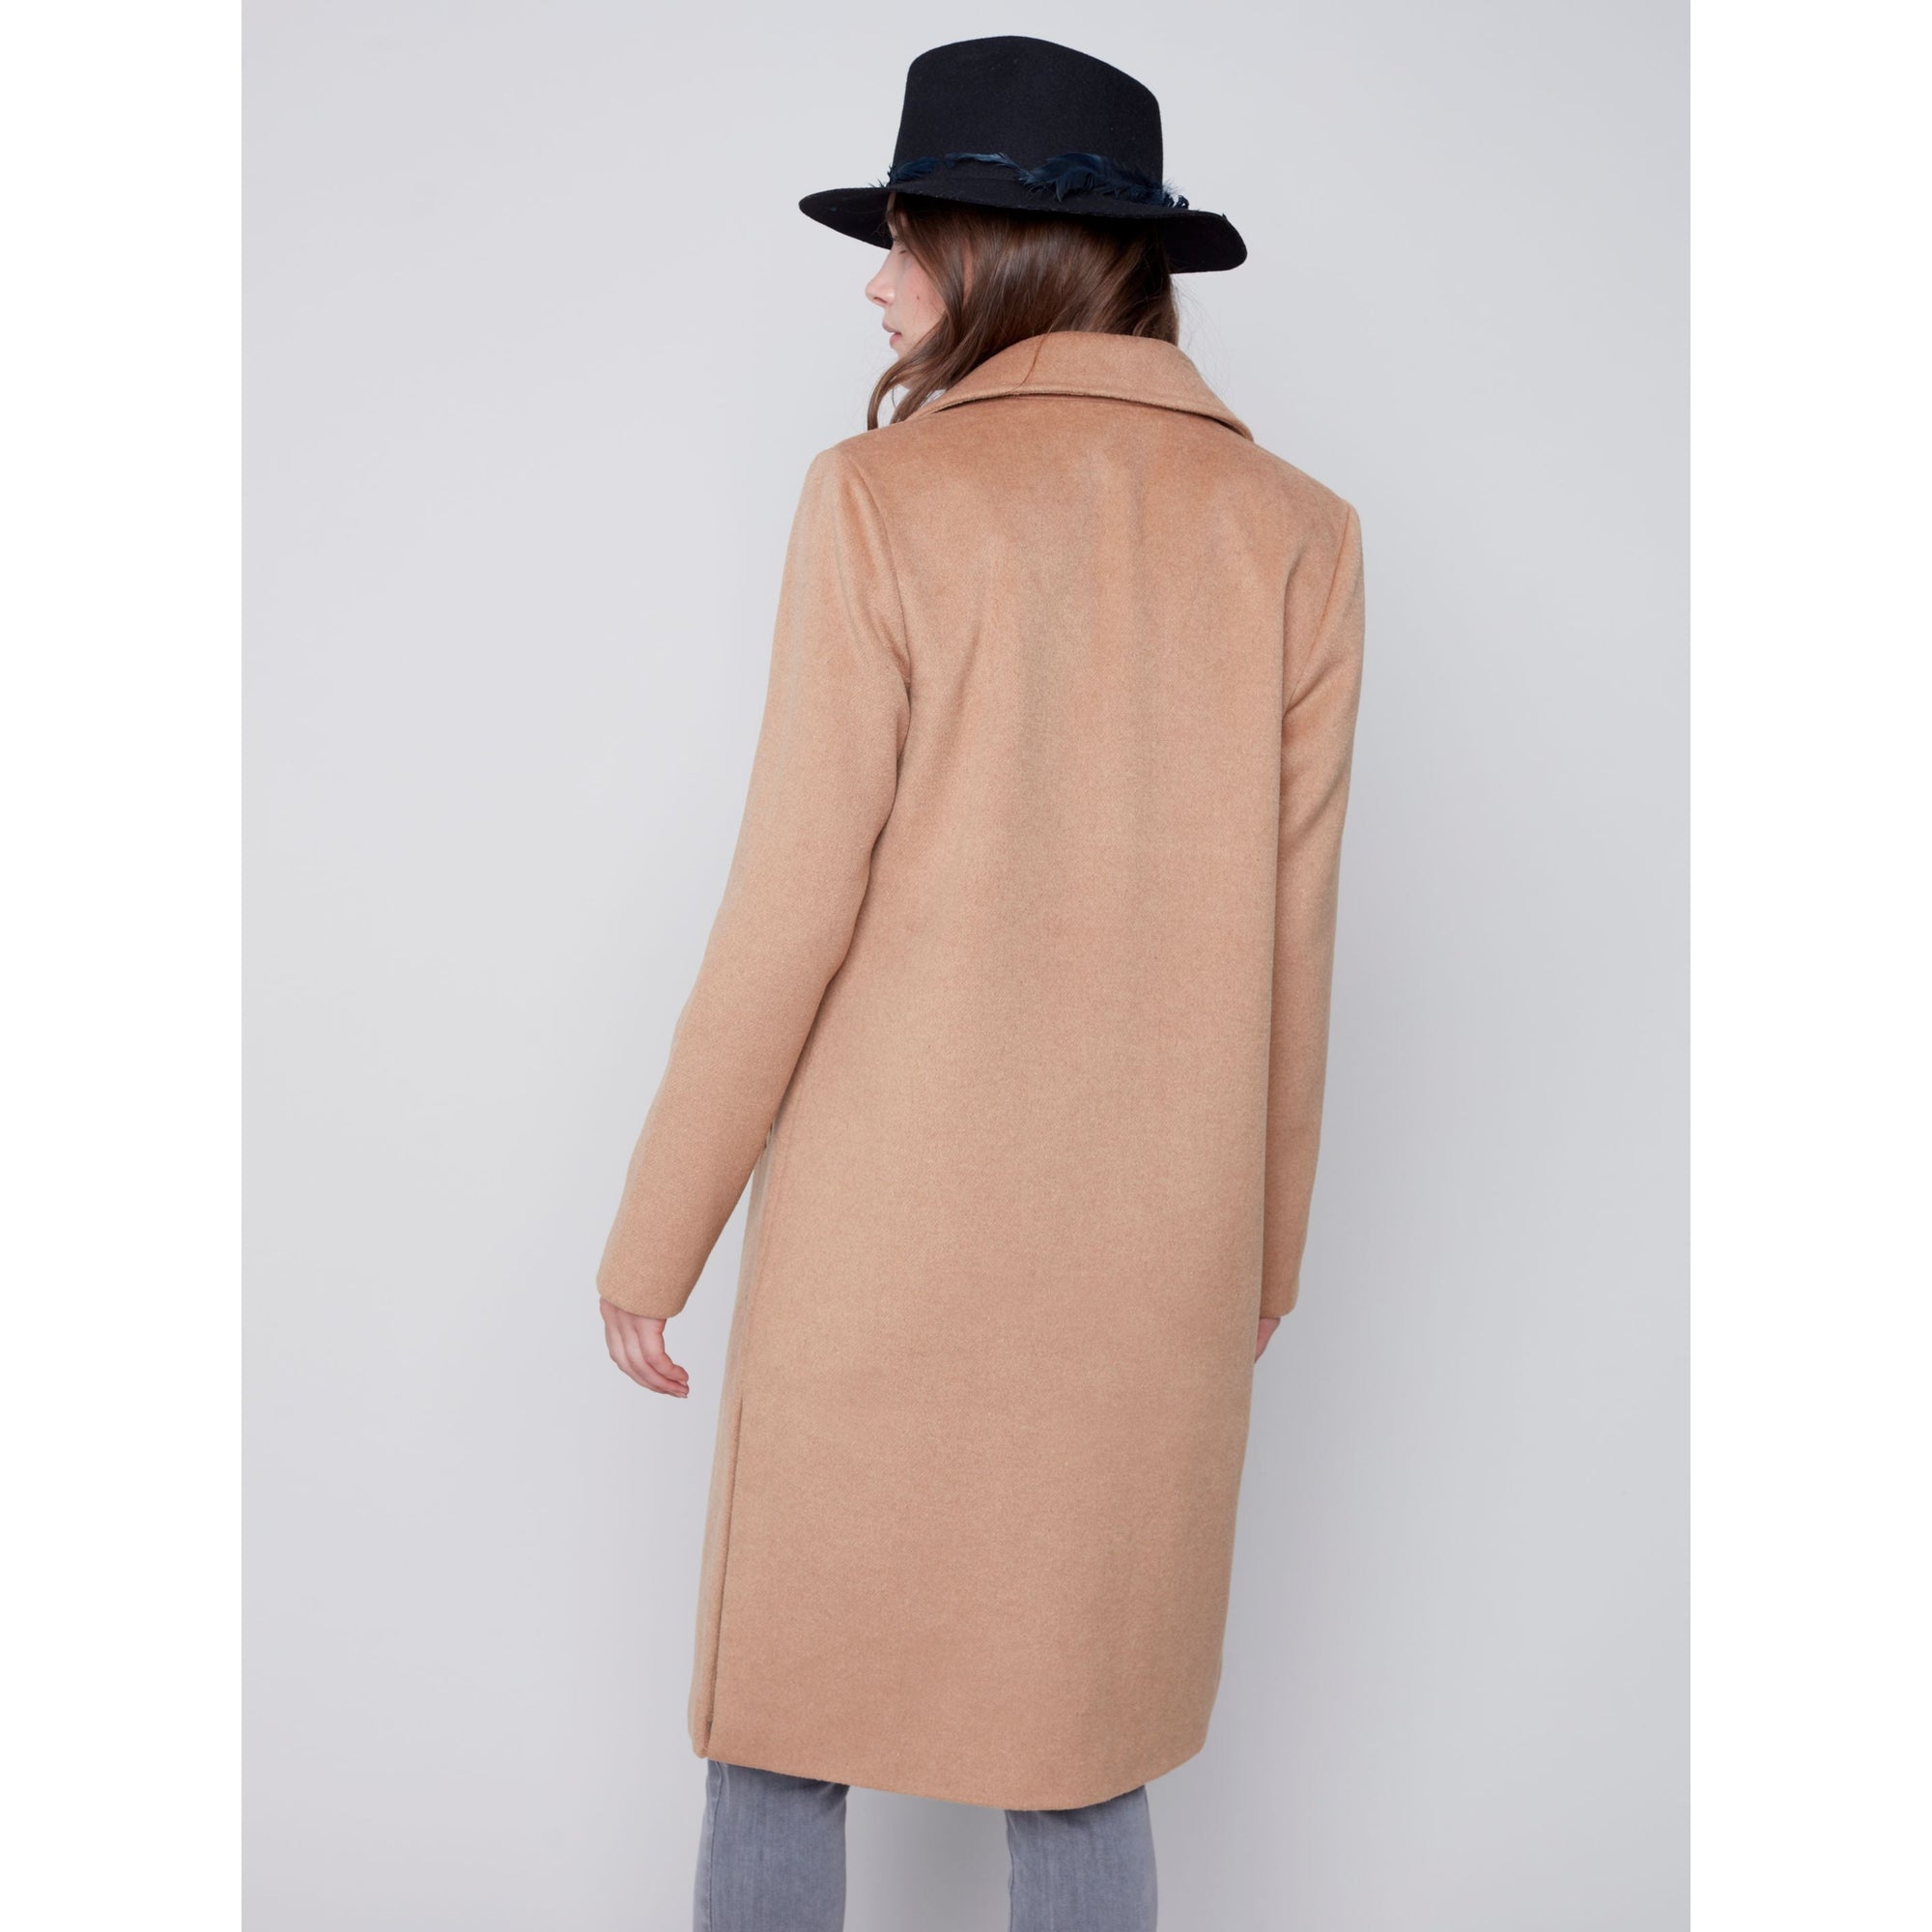 SOLID FAUX WOOL MELTON KNEE LENGTH COAT-Jackets & Sweaters-CHARLIE B-SMALL-TRUFFLE-Coriander